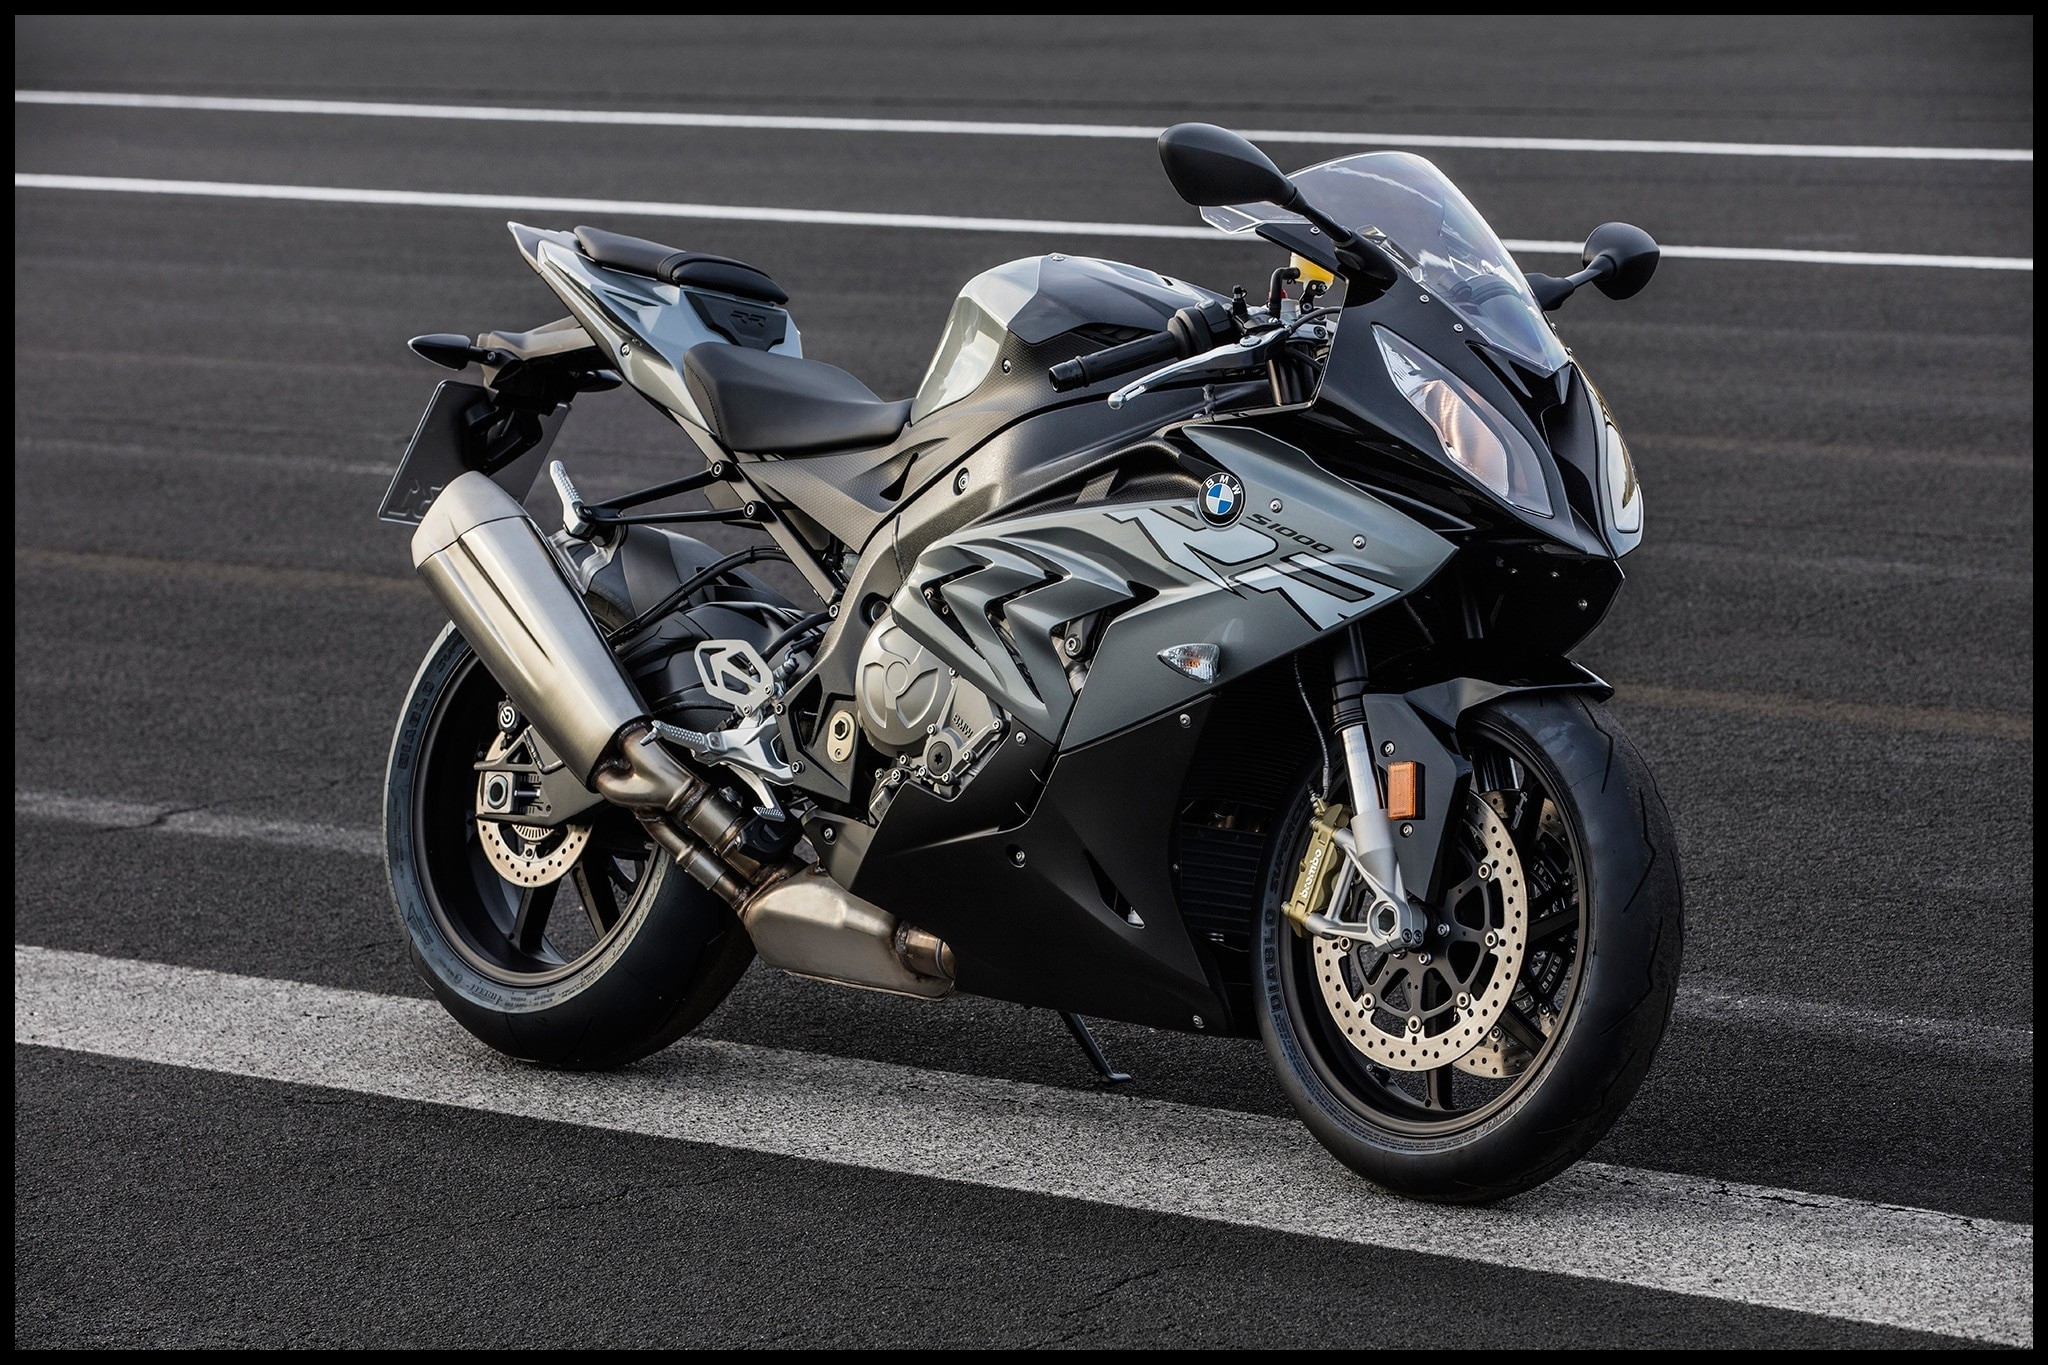 2019 Bmw Rr Best 2019 Bmw S1000rr Inspirational 2016 Bmw S1000rr First Ride Review